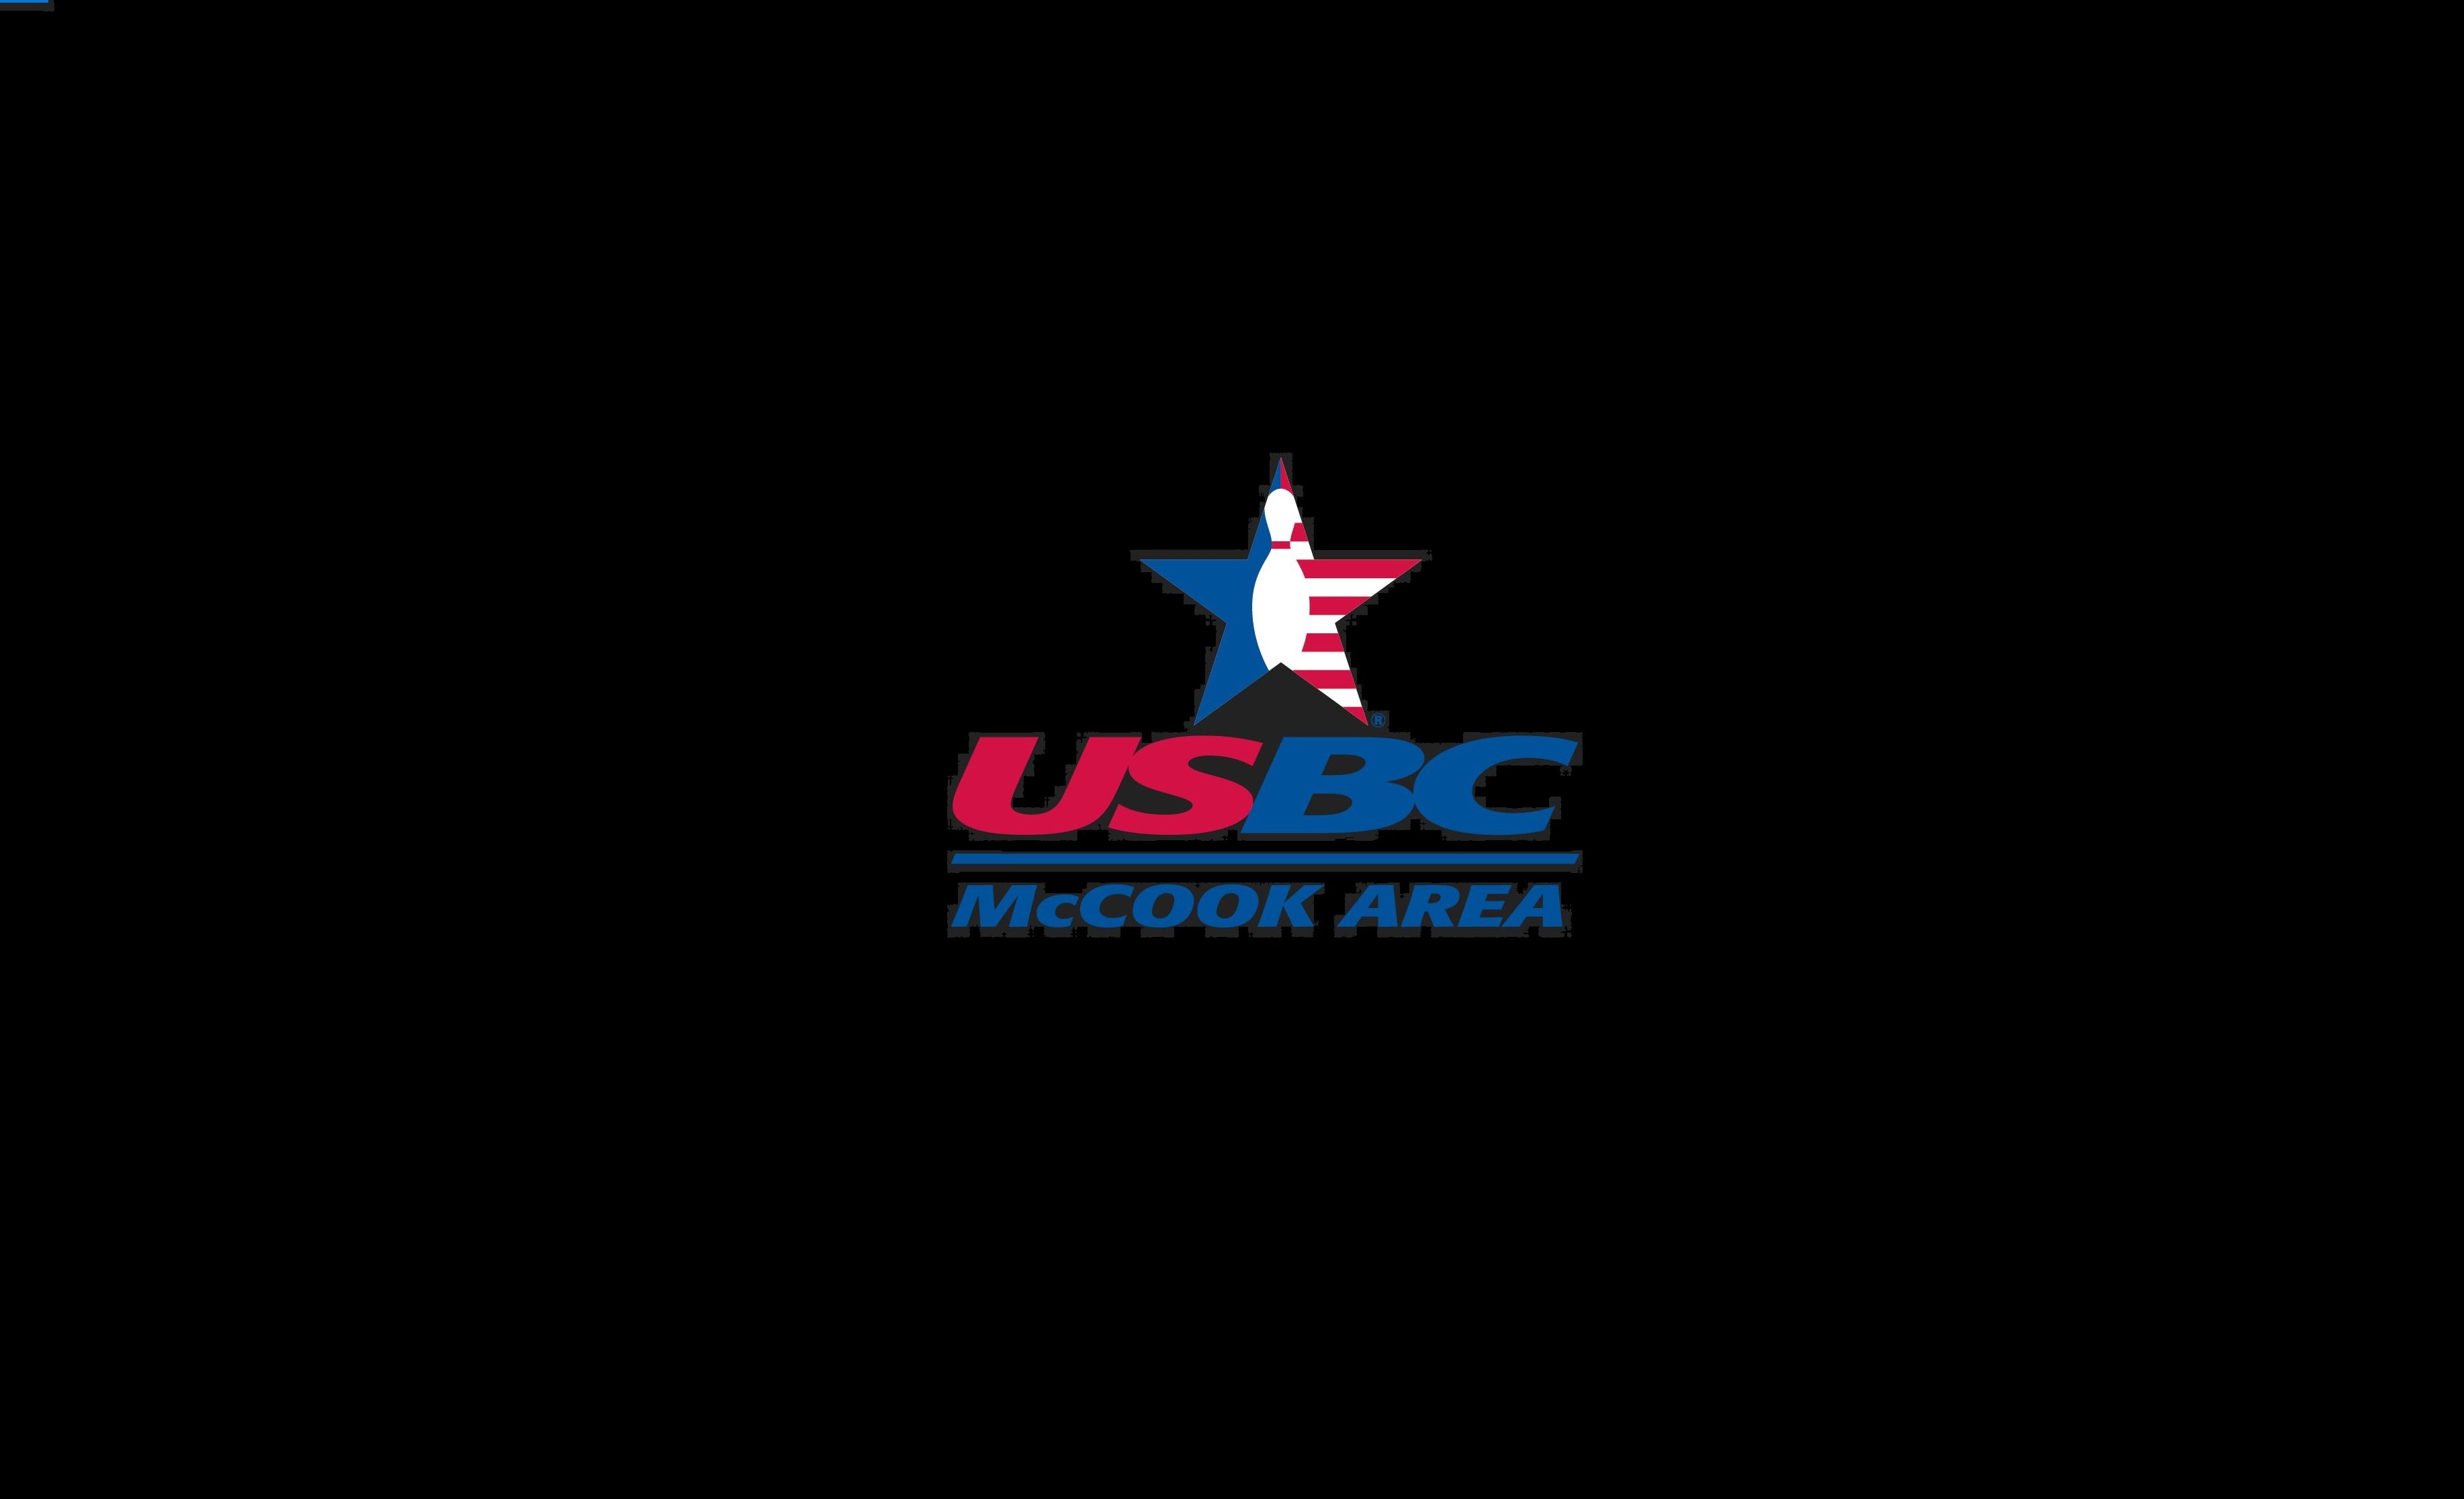 USBC Bowling Association for Atwood Lanes, Carroll Lanes, Forest Lanes, Garson Lanes, J-D Lanes, Valie Lanes, and Wabash Lanes.